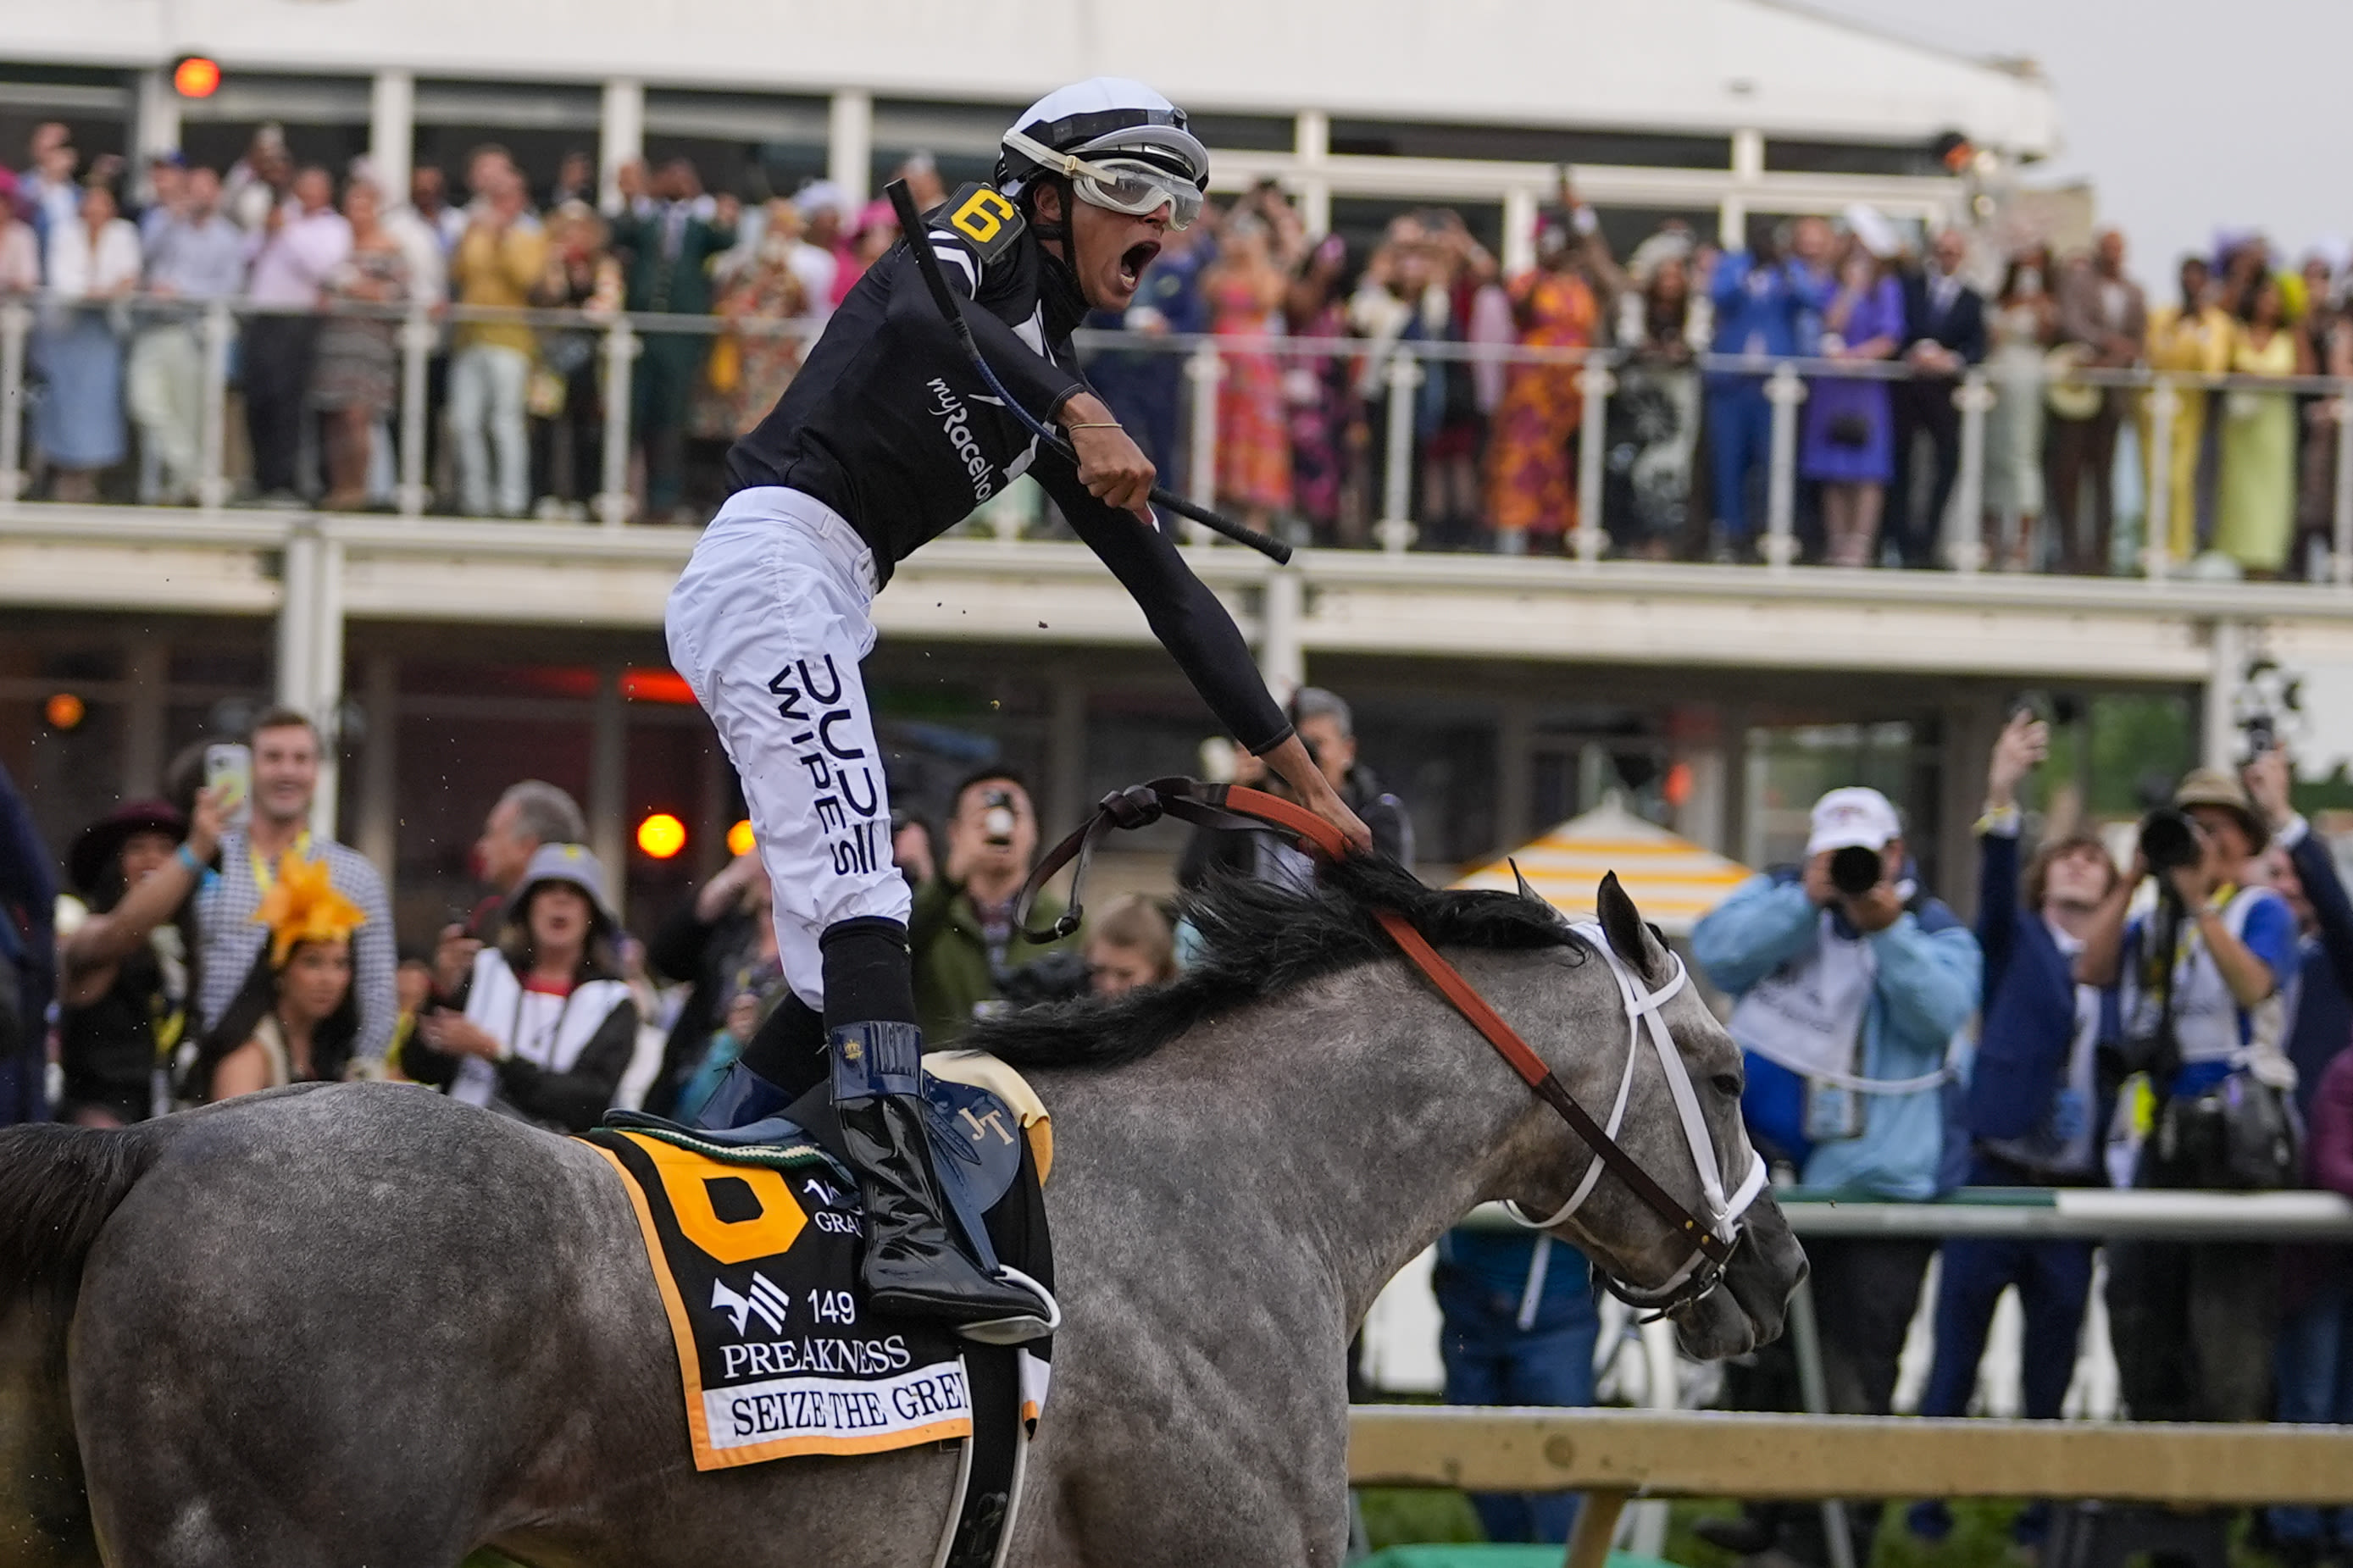 Jaime Torres wins the Preakness with Seize the Grey 2 years after starting to ride horses